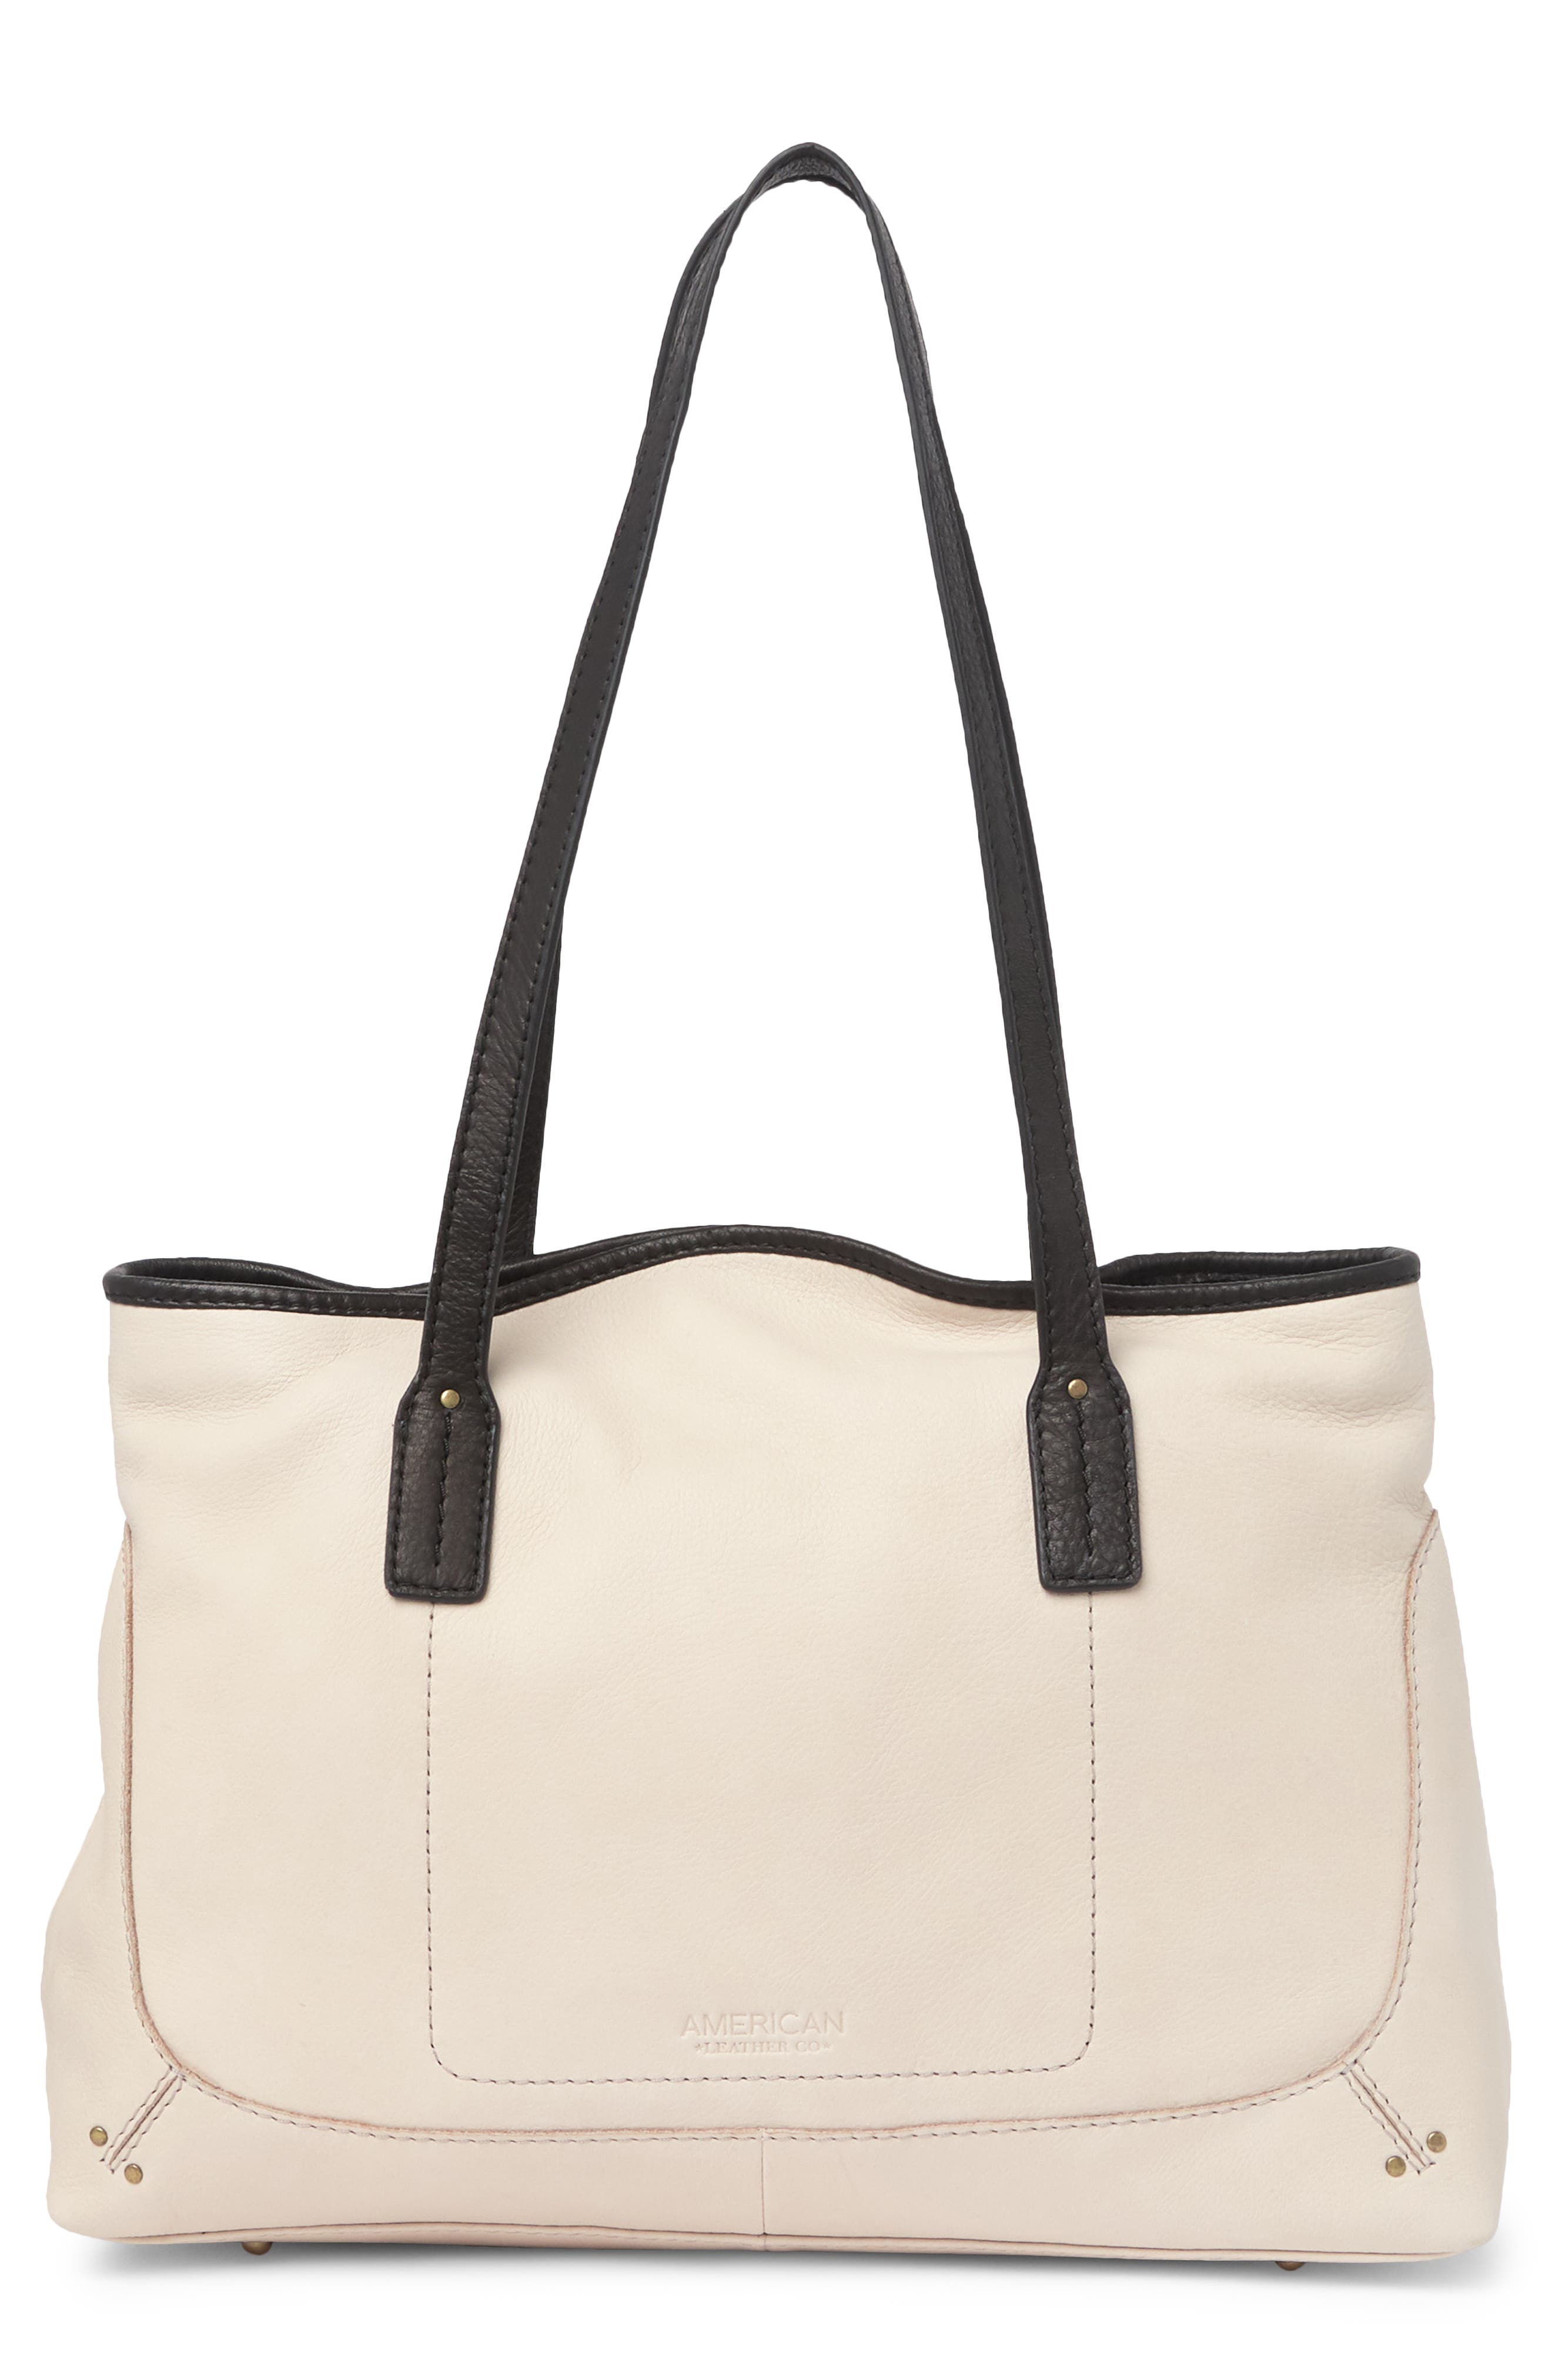 American Leather Co. Kadoka Leather Shopper In Stone With Black